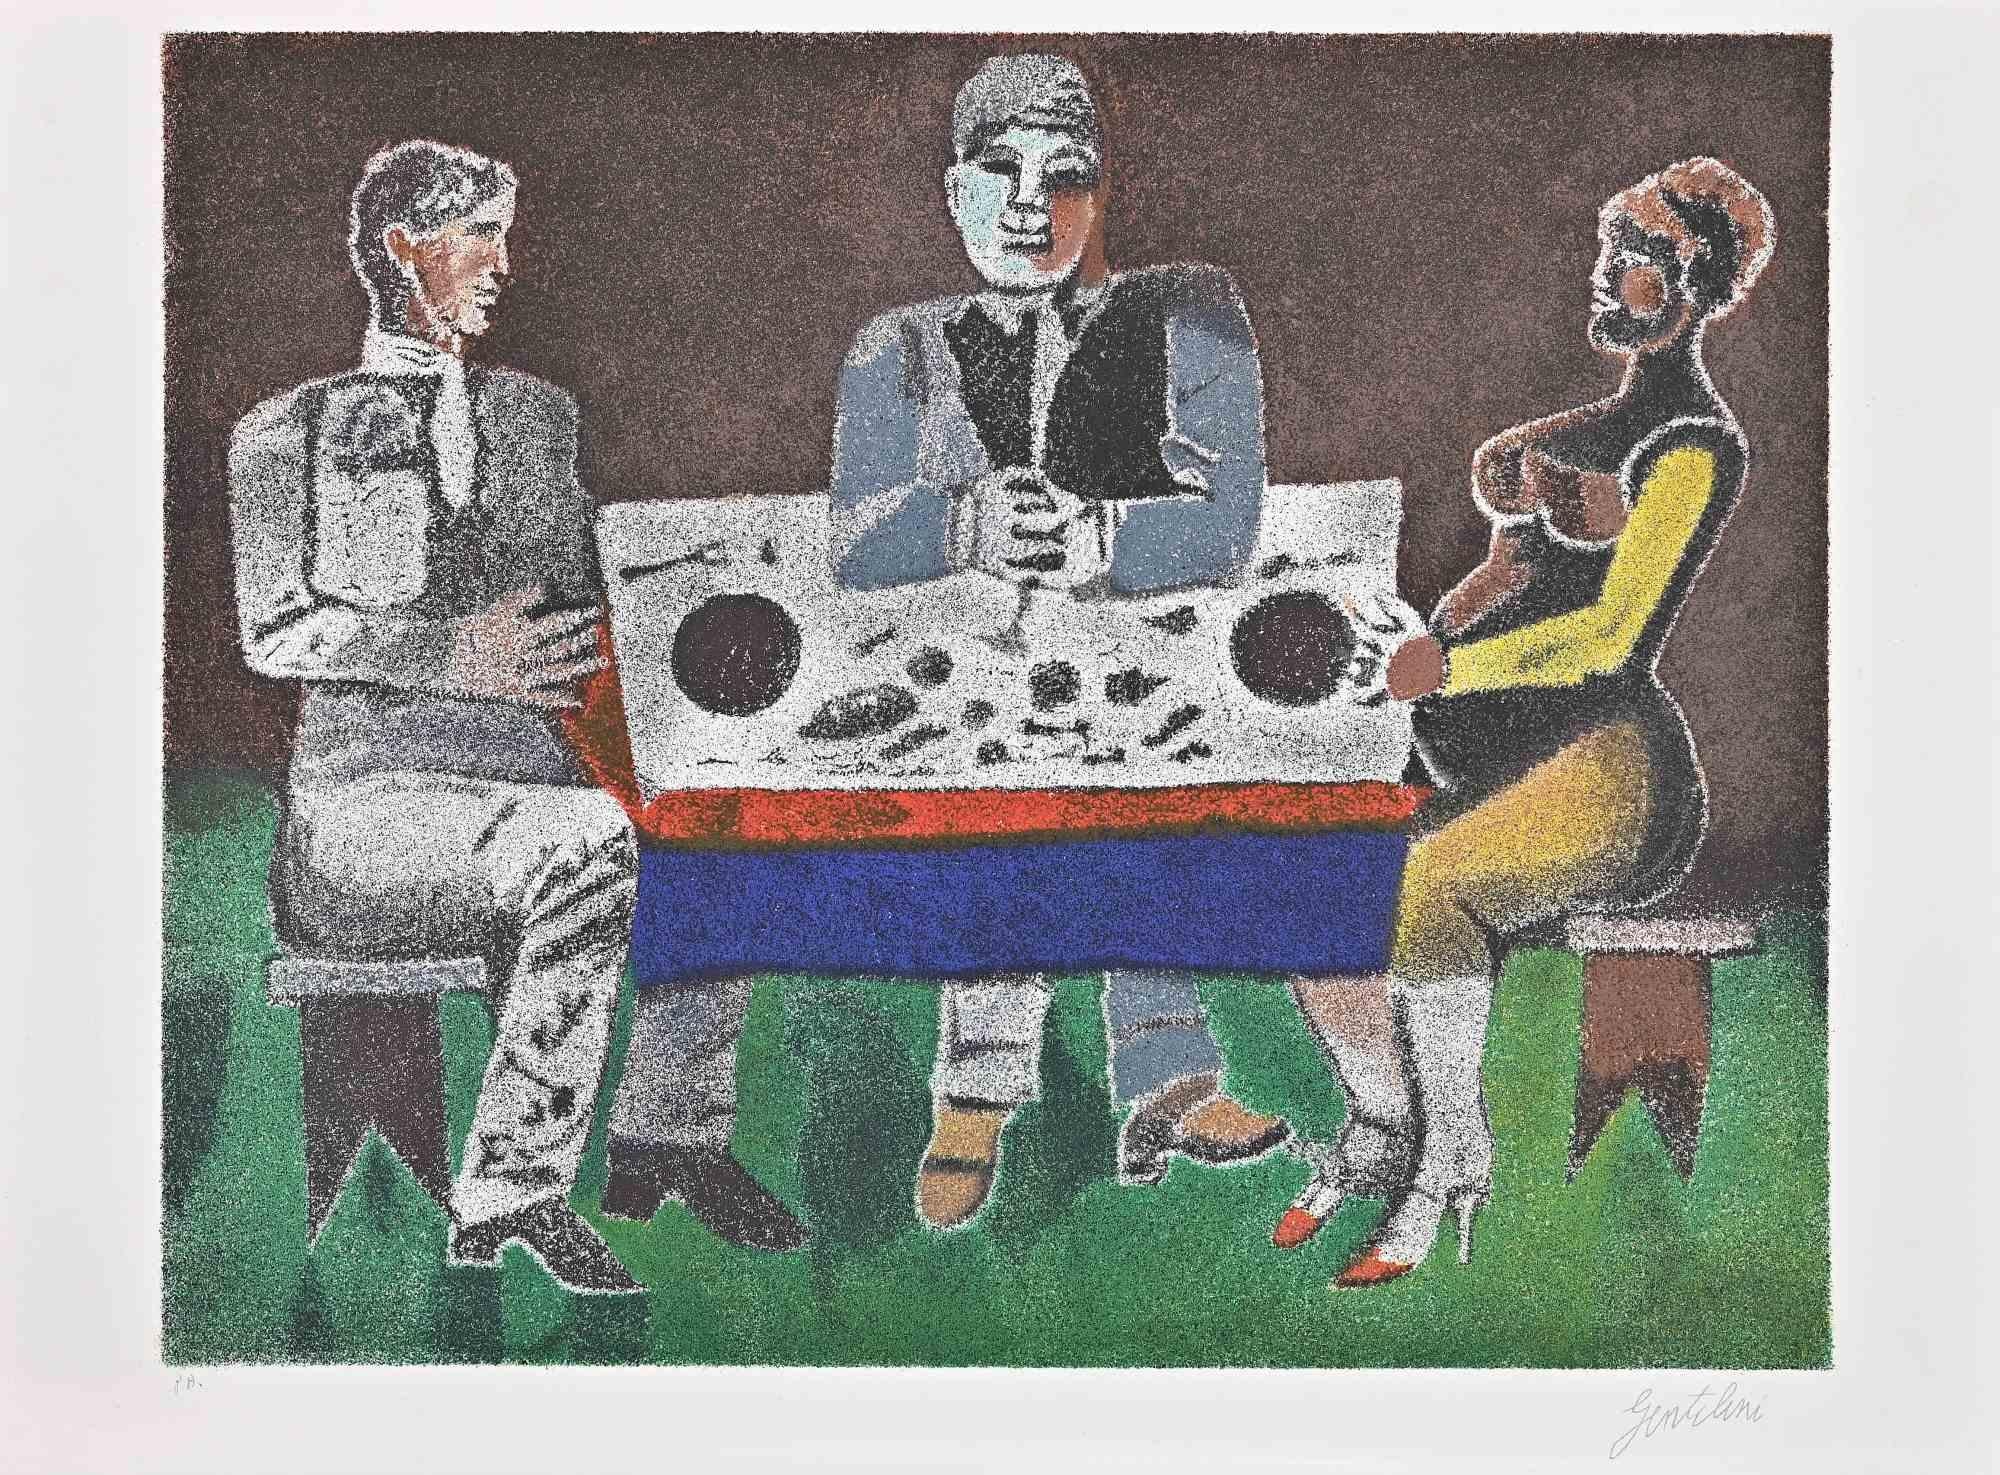 The Dinner is a Lithograph realized by Franco Gentilini (Italian Painter, 1909-1981), in the 1970s.

The state of preservation of the artwork is excellent.

Hand-signed.

Artist's proof.

Franco Gentilini ( Italian Painter, 1909-1981): Gentilini's